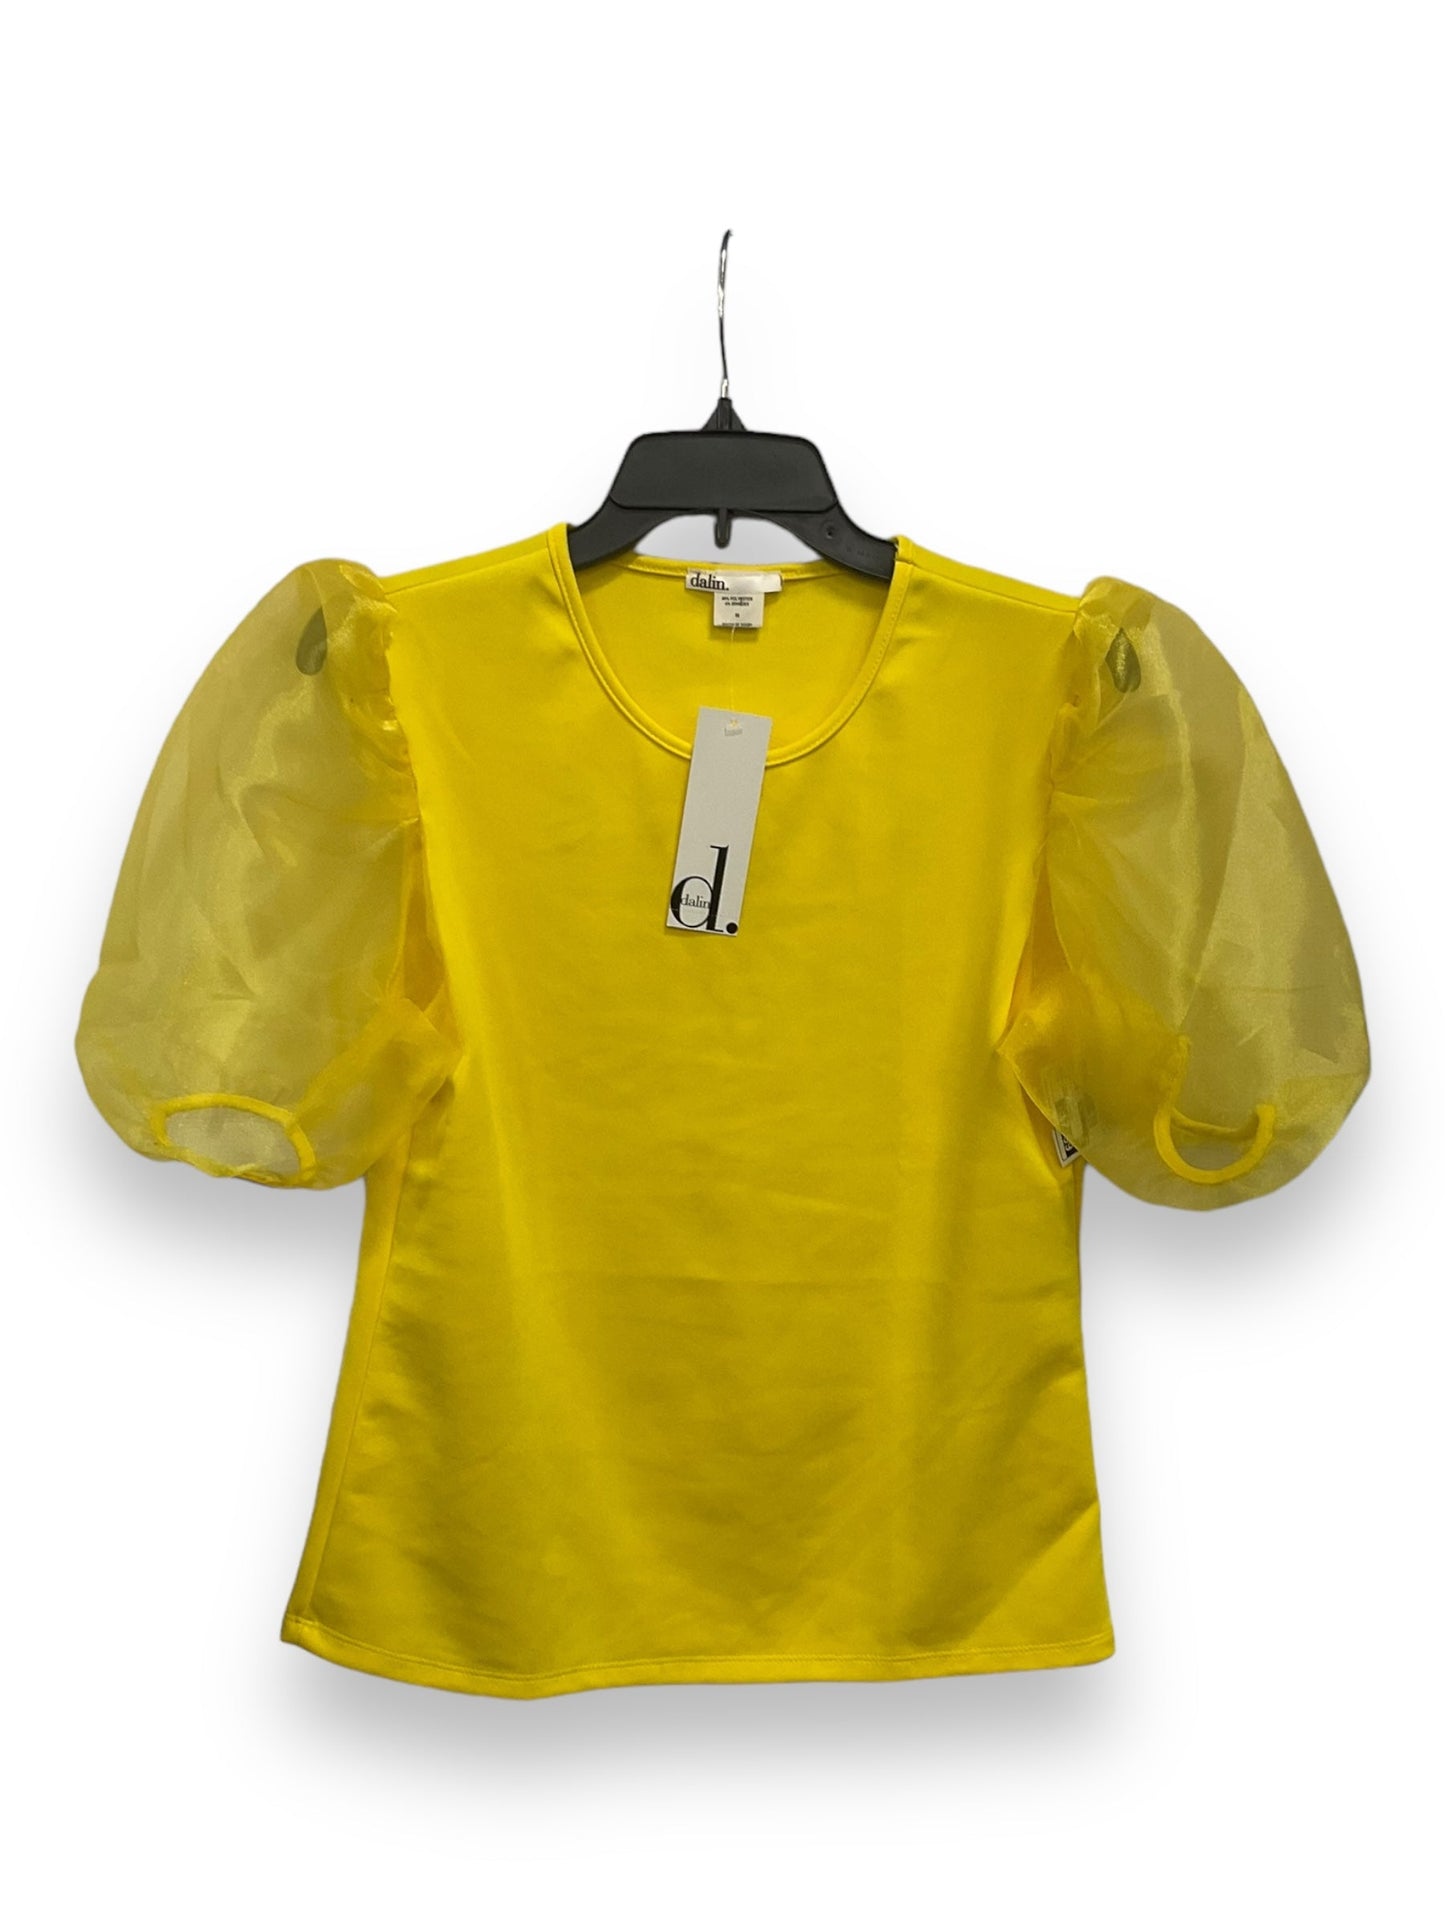 Yellow Top Short Sleeve Basic Clothes Mentor, Size M